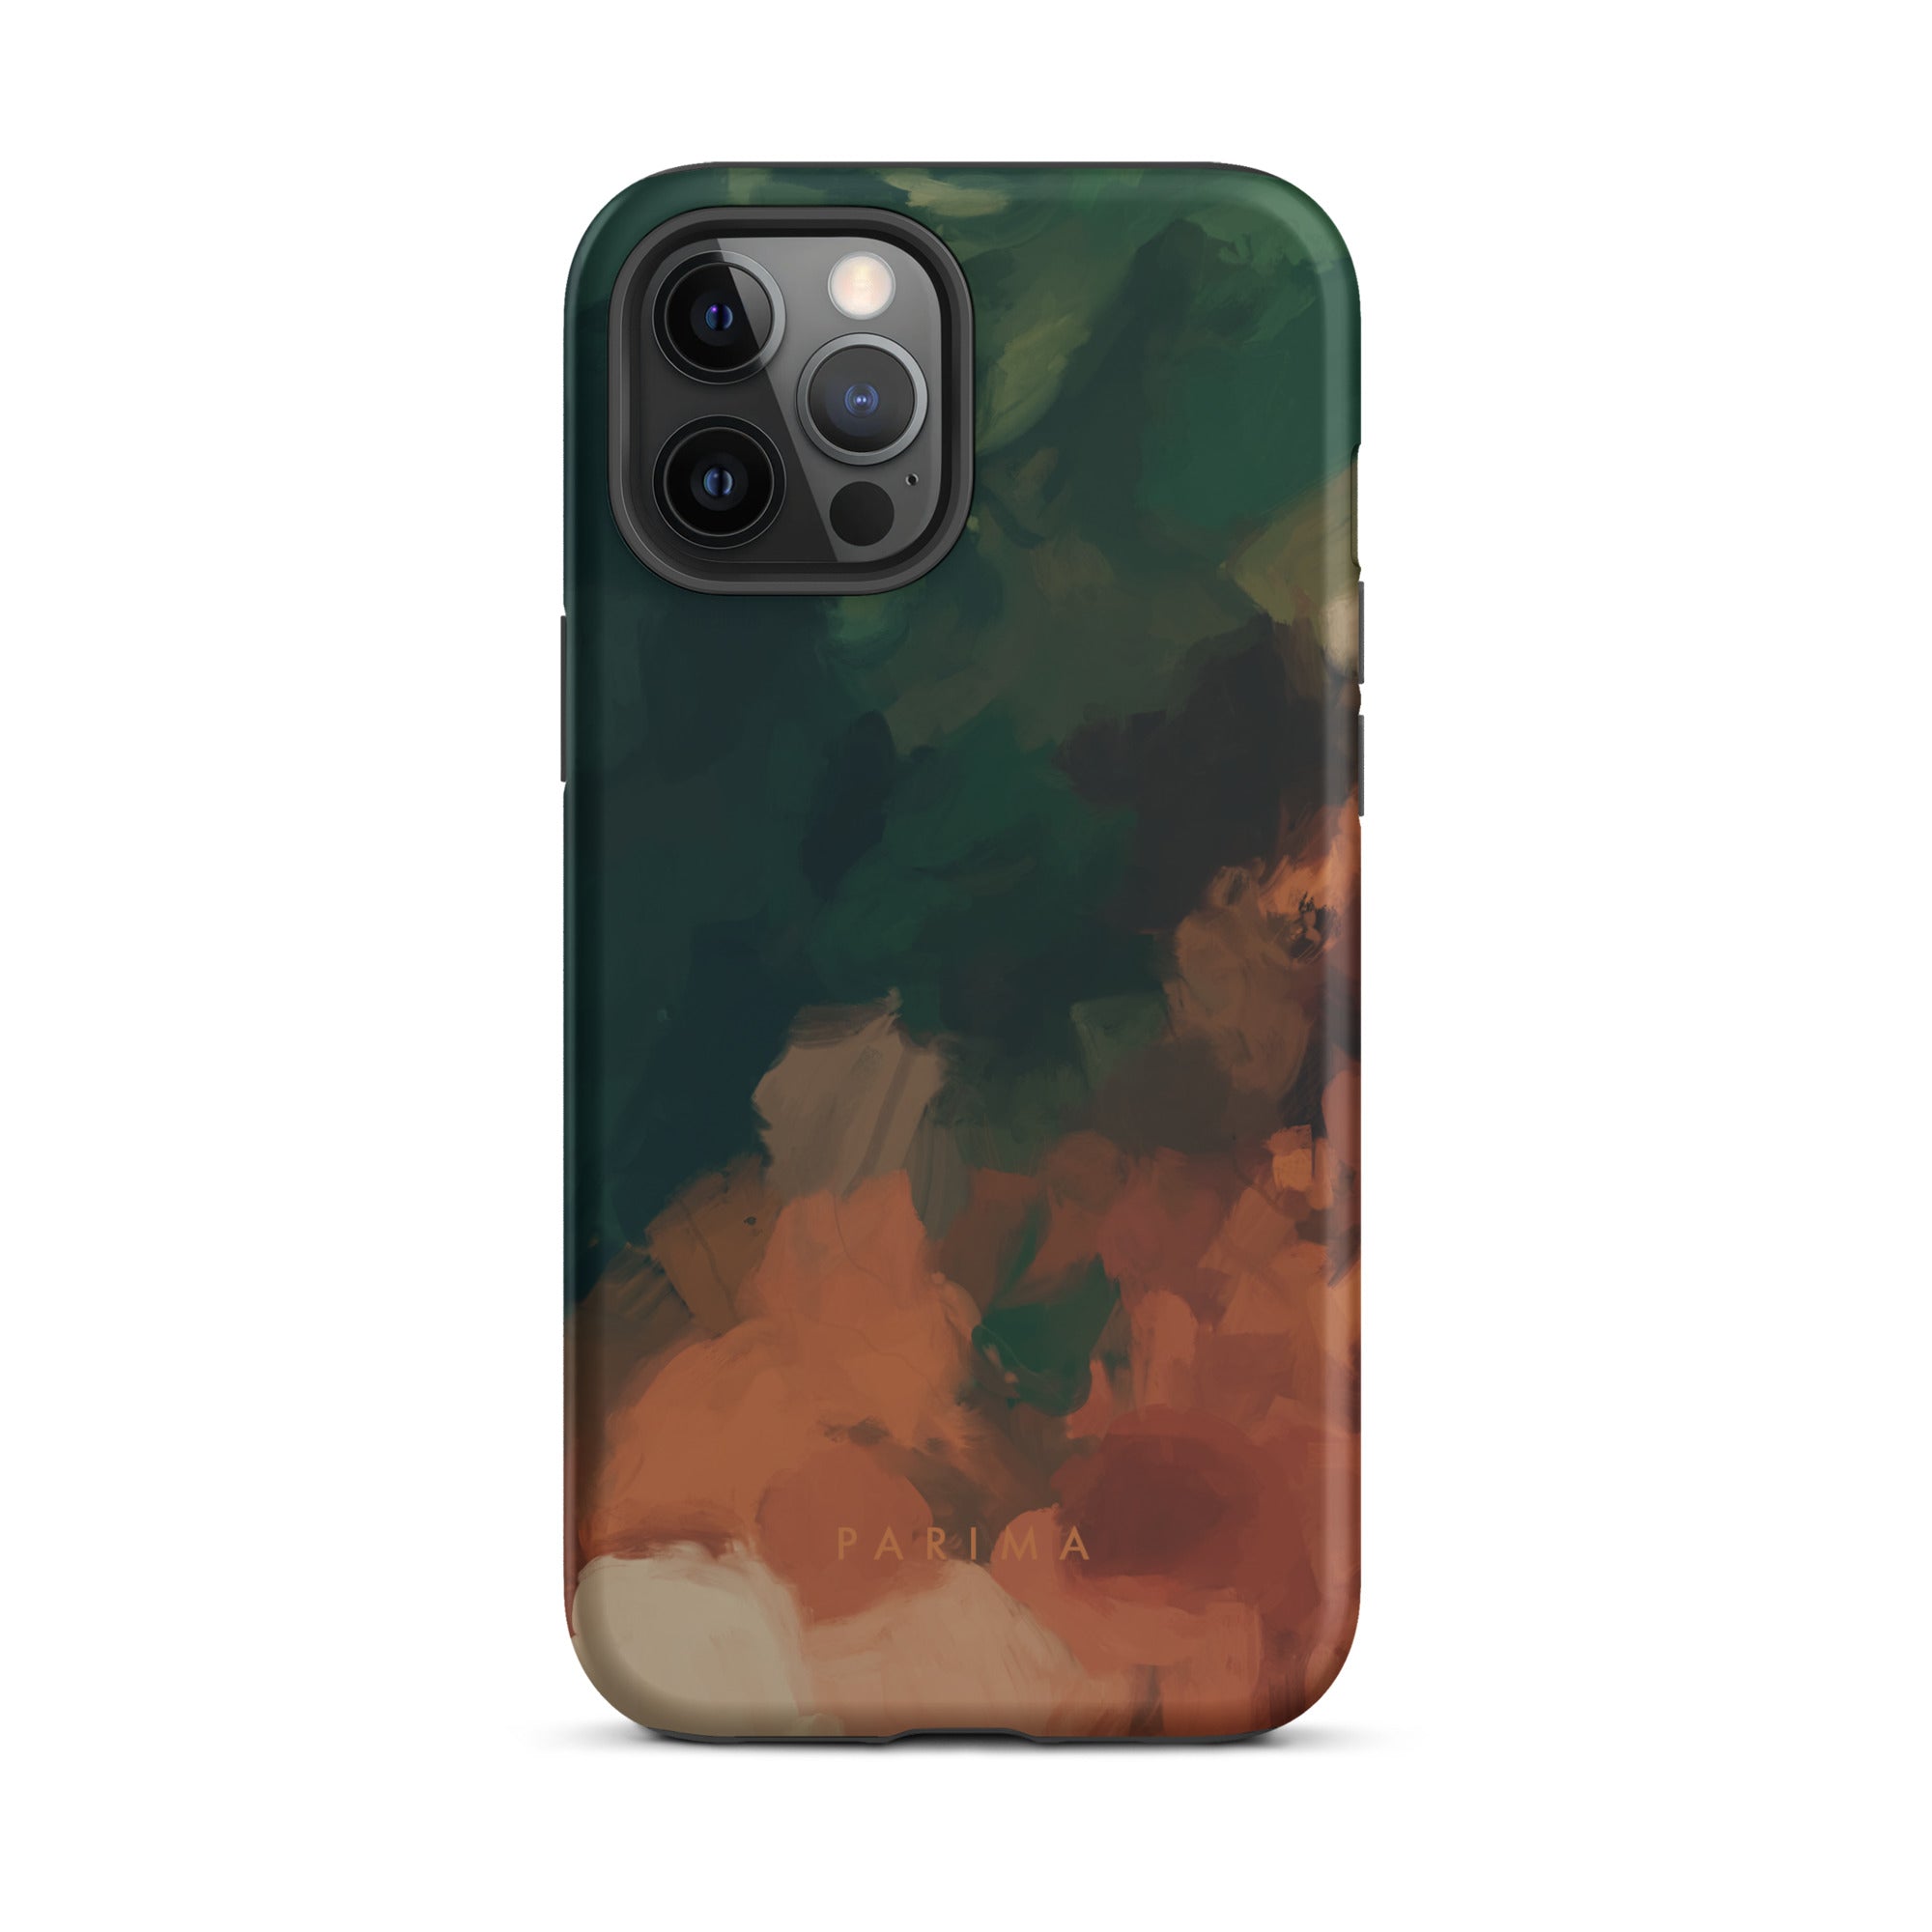 Cedar, green and brown abstract art - iPhone 12 Pro Max tough case by Parima Studio